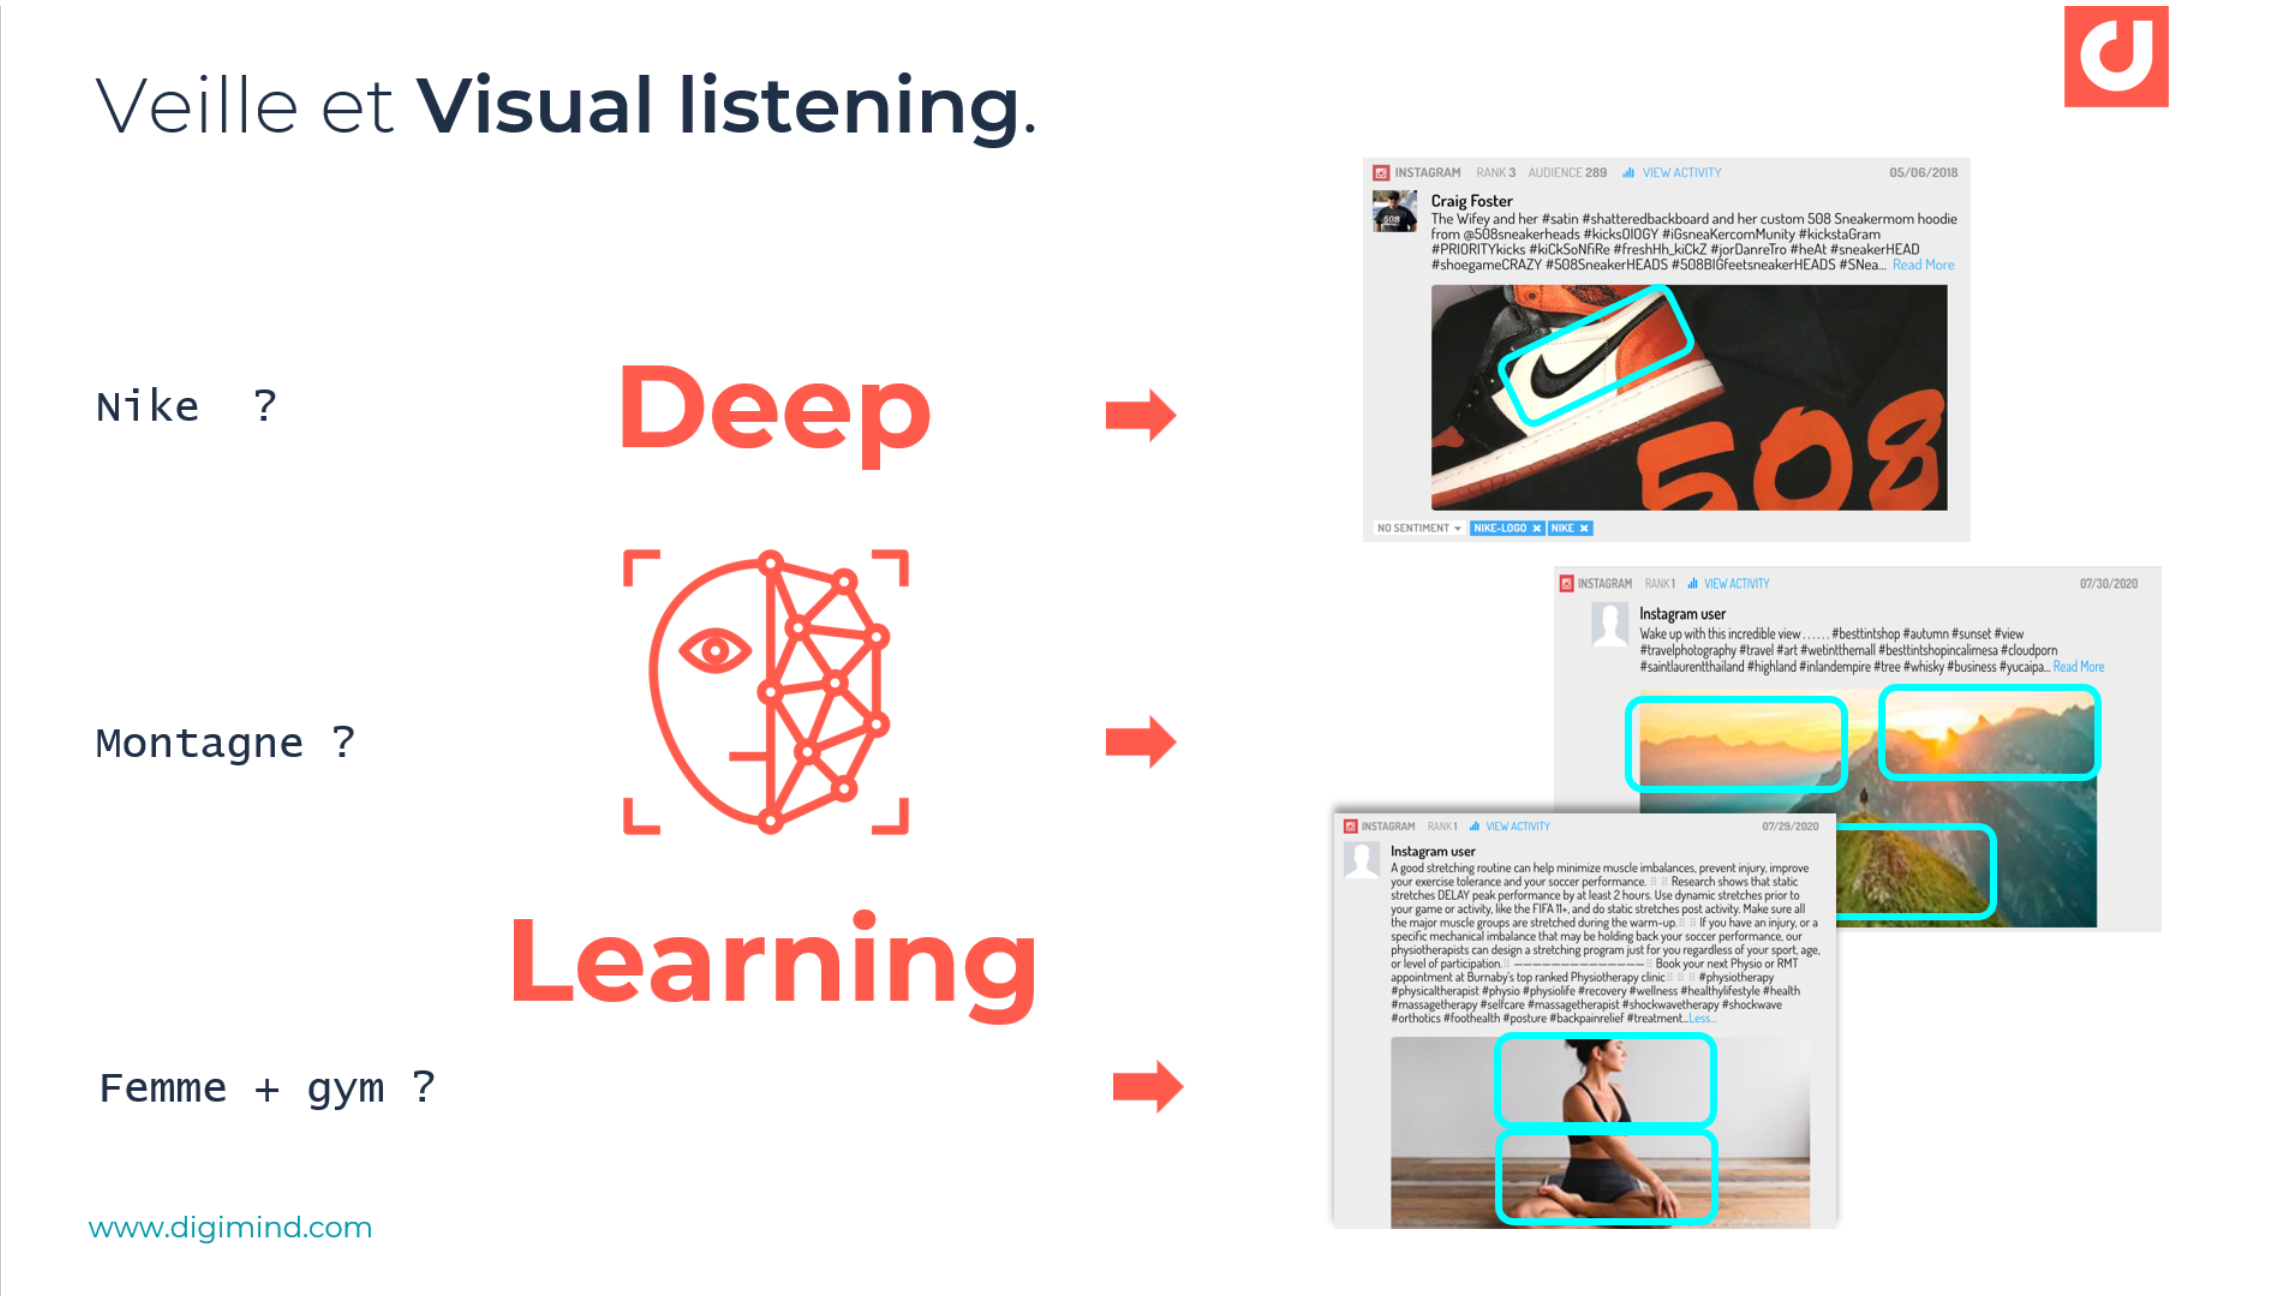 Le deep learning pour le visual listening.